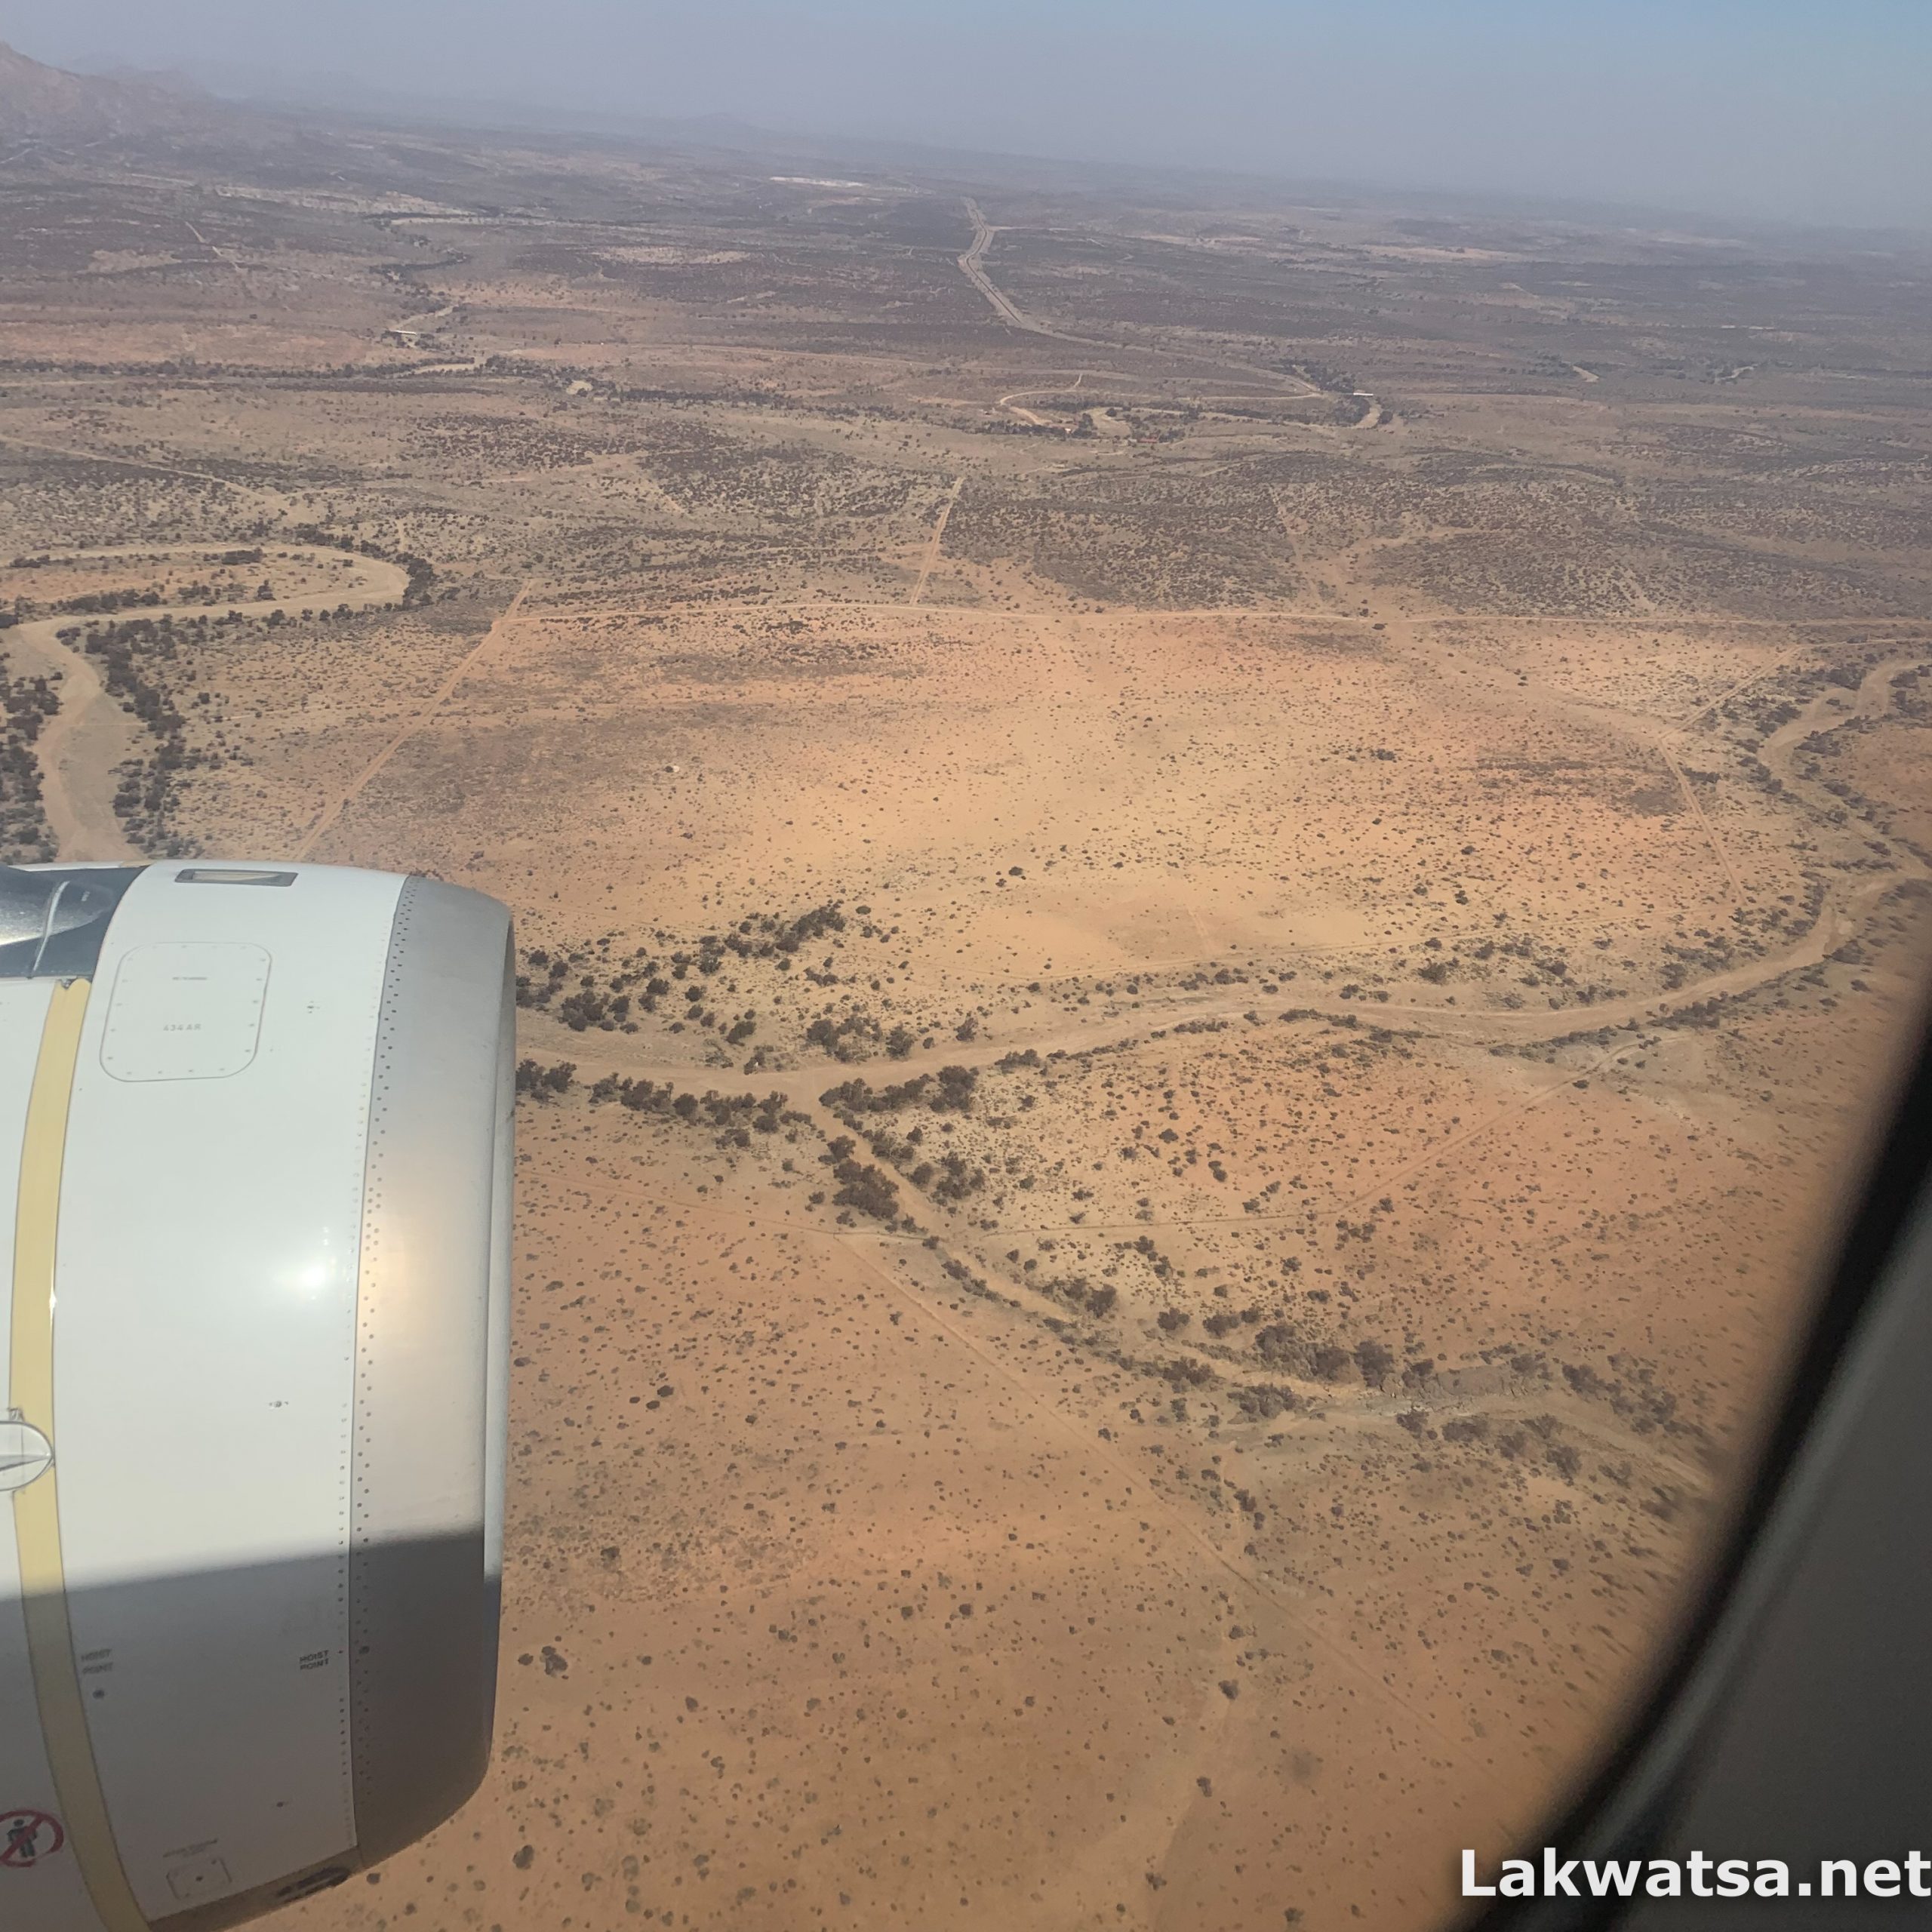 Approaching Windhoek, Namibia by plane